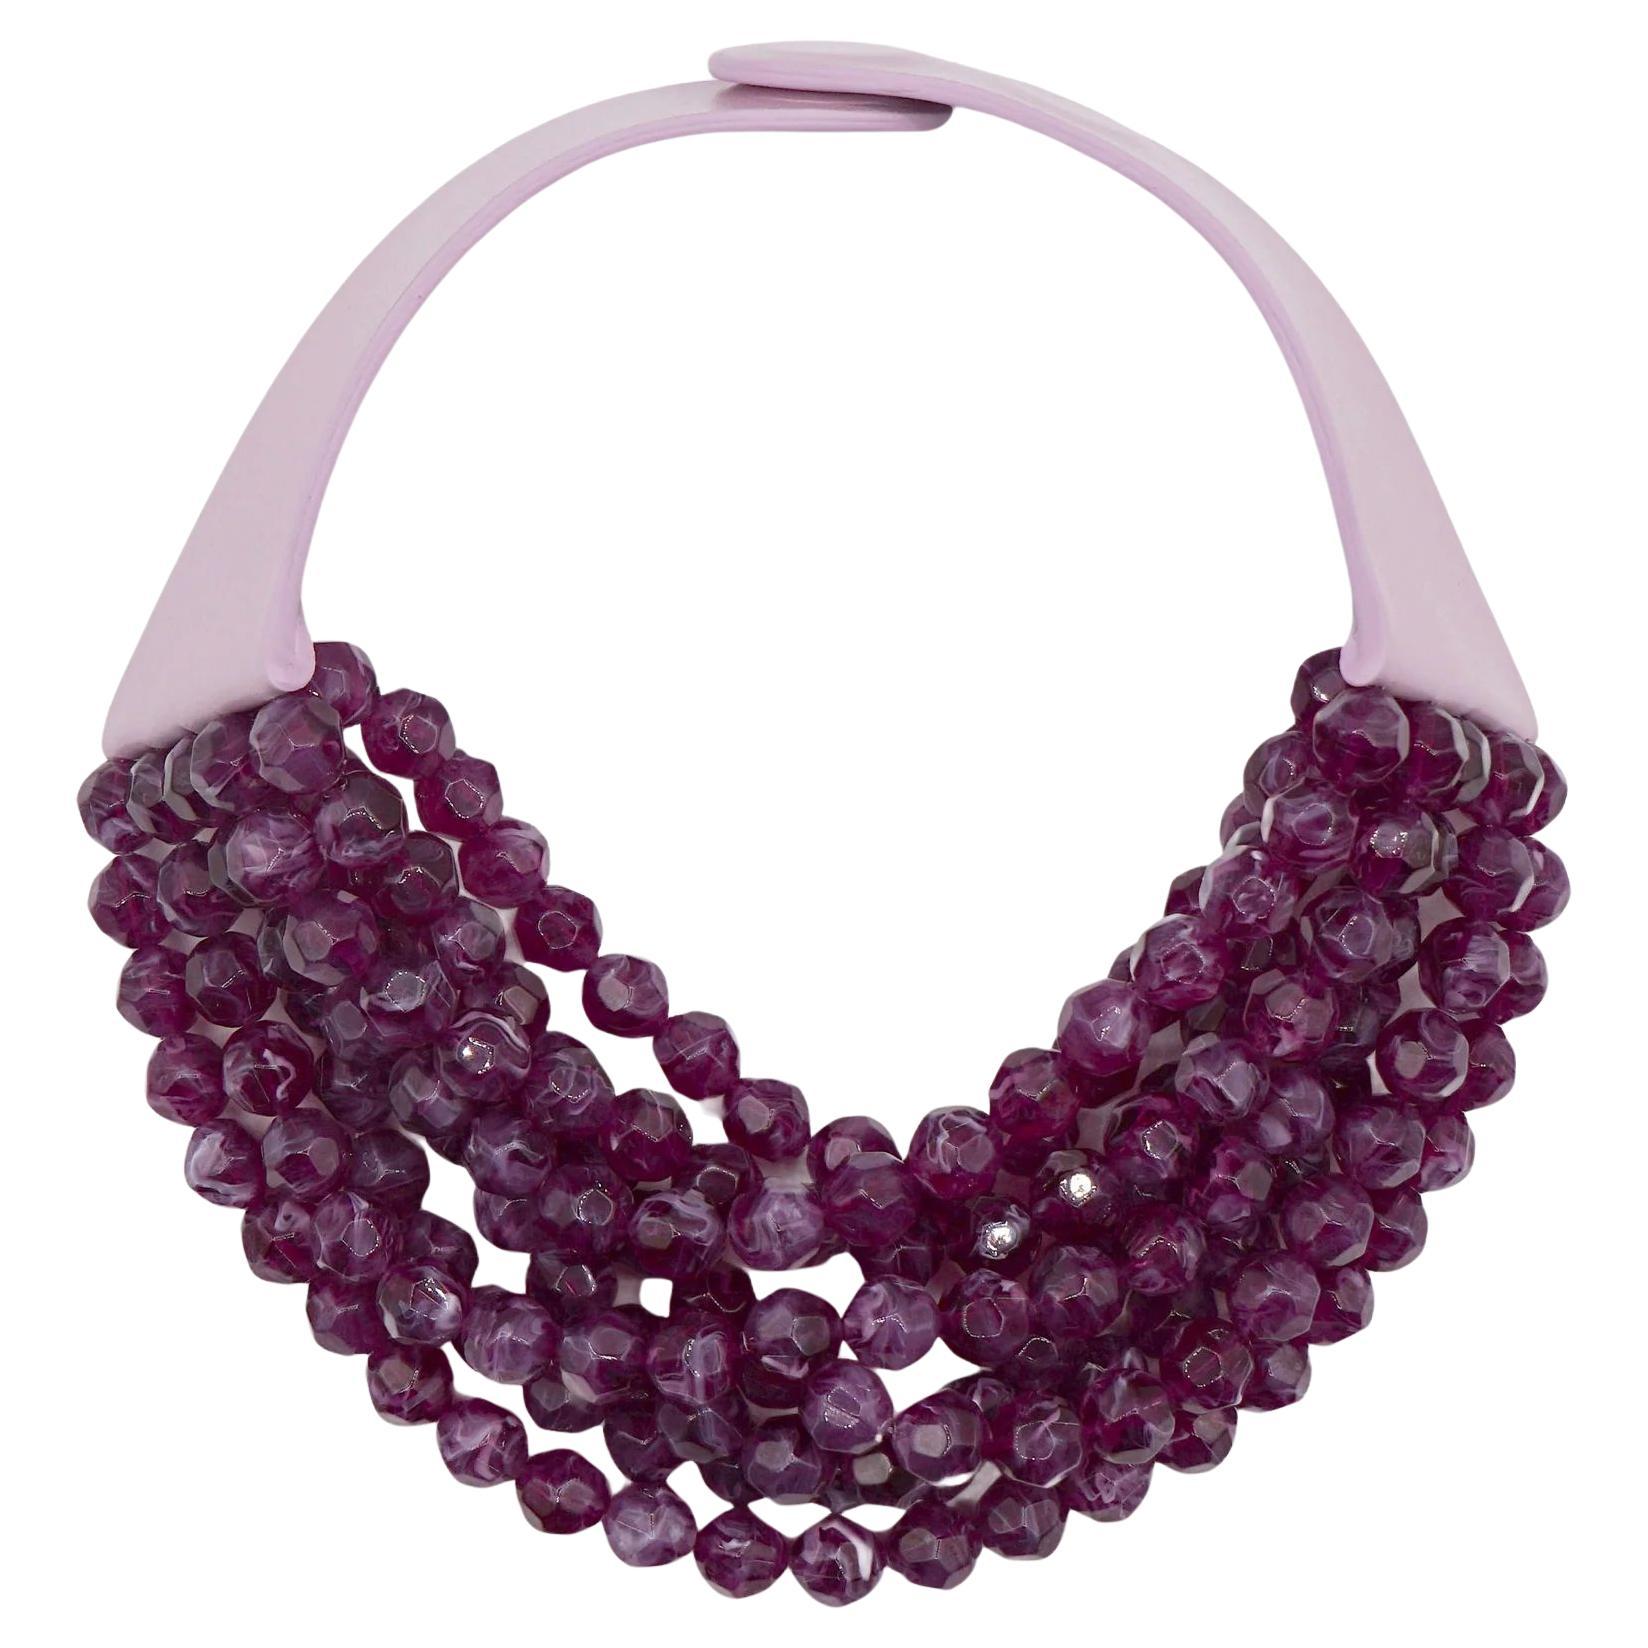 Fairchild Baldwin Red Carpet Multi Strand Ametista Beads Statement Necklace  For Sale